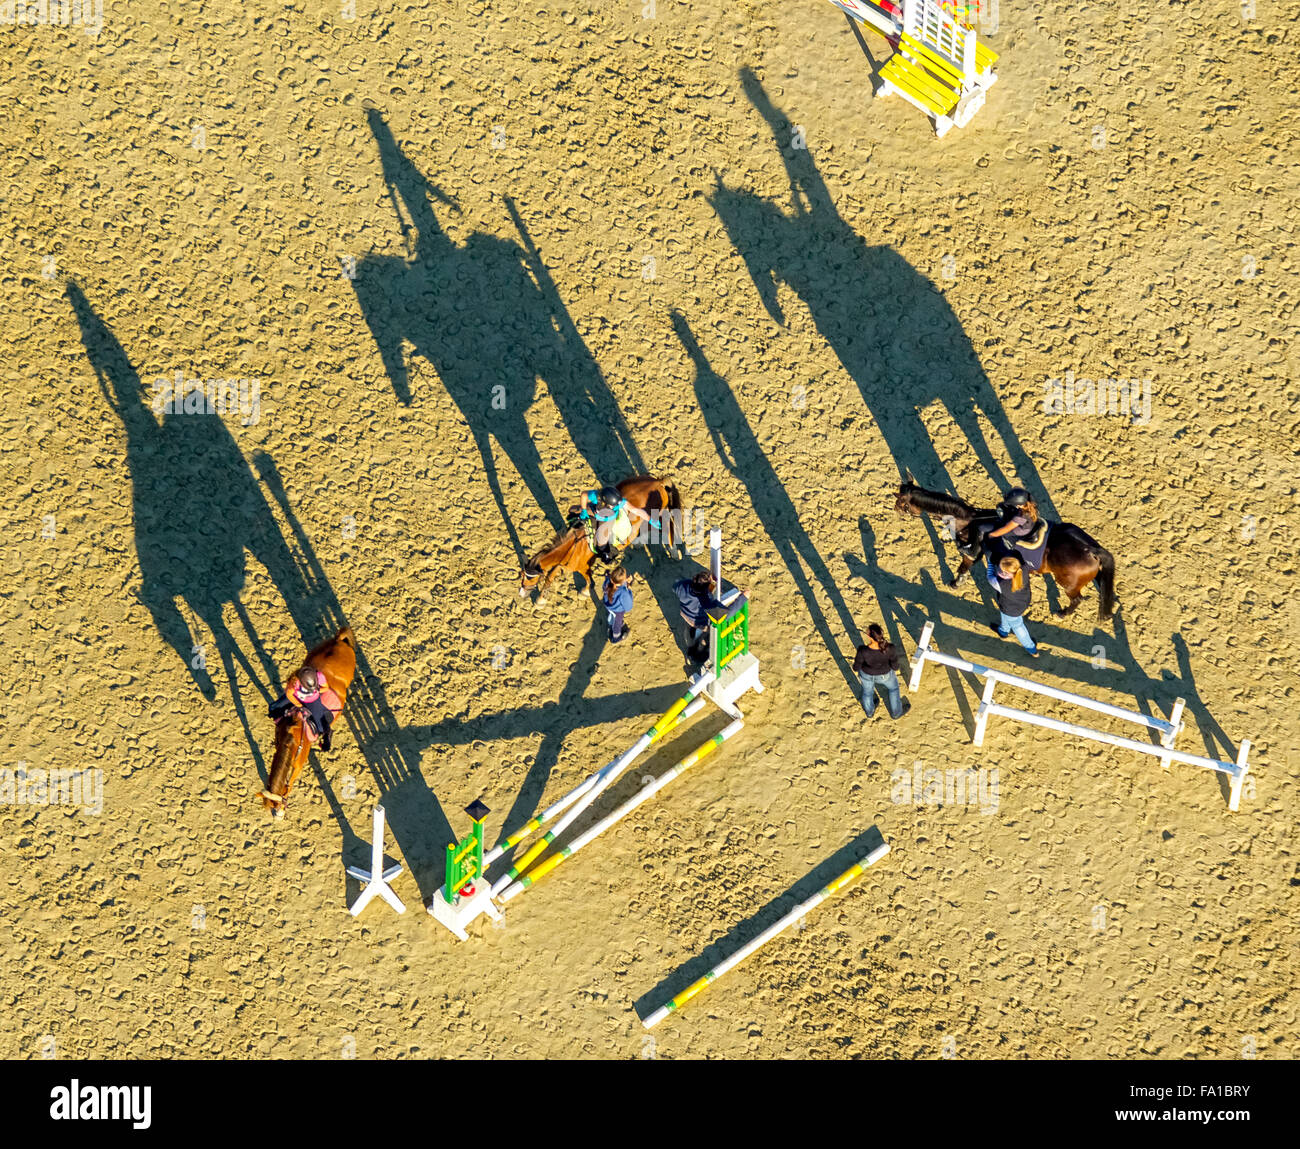 Obstacle Training with long shadows, riding facilities, Reiterhof Rhynern, riders, horses, barriers, Hamm, Ruhr area, Stock Photo